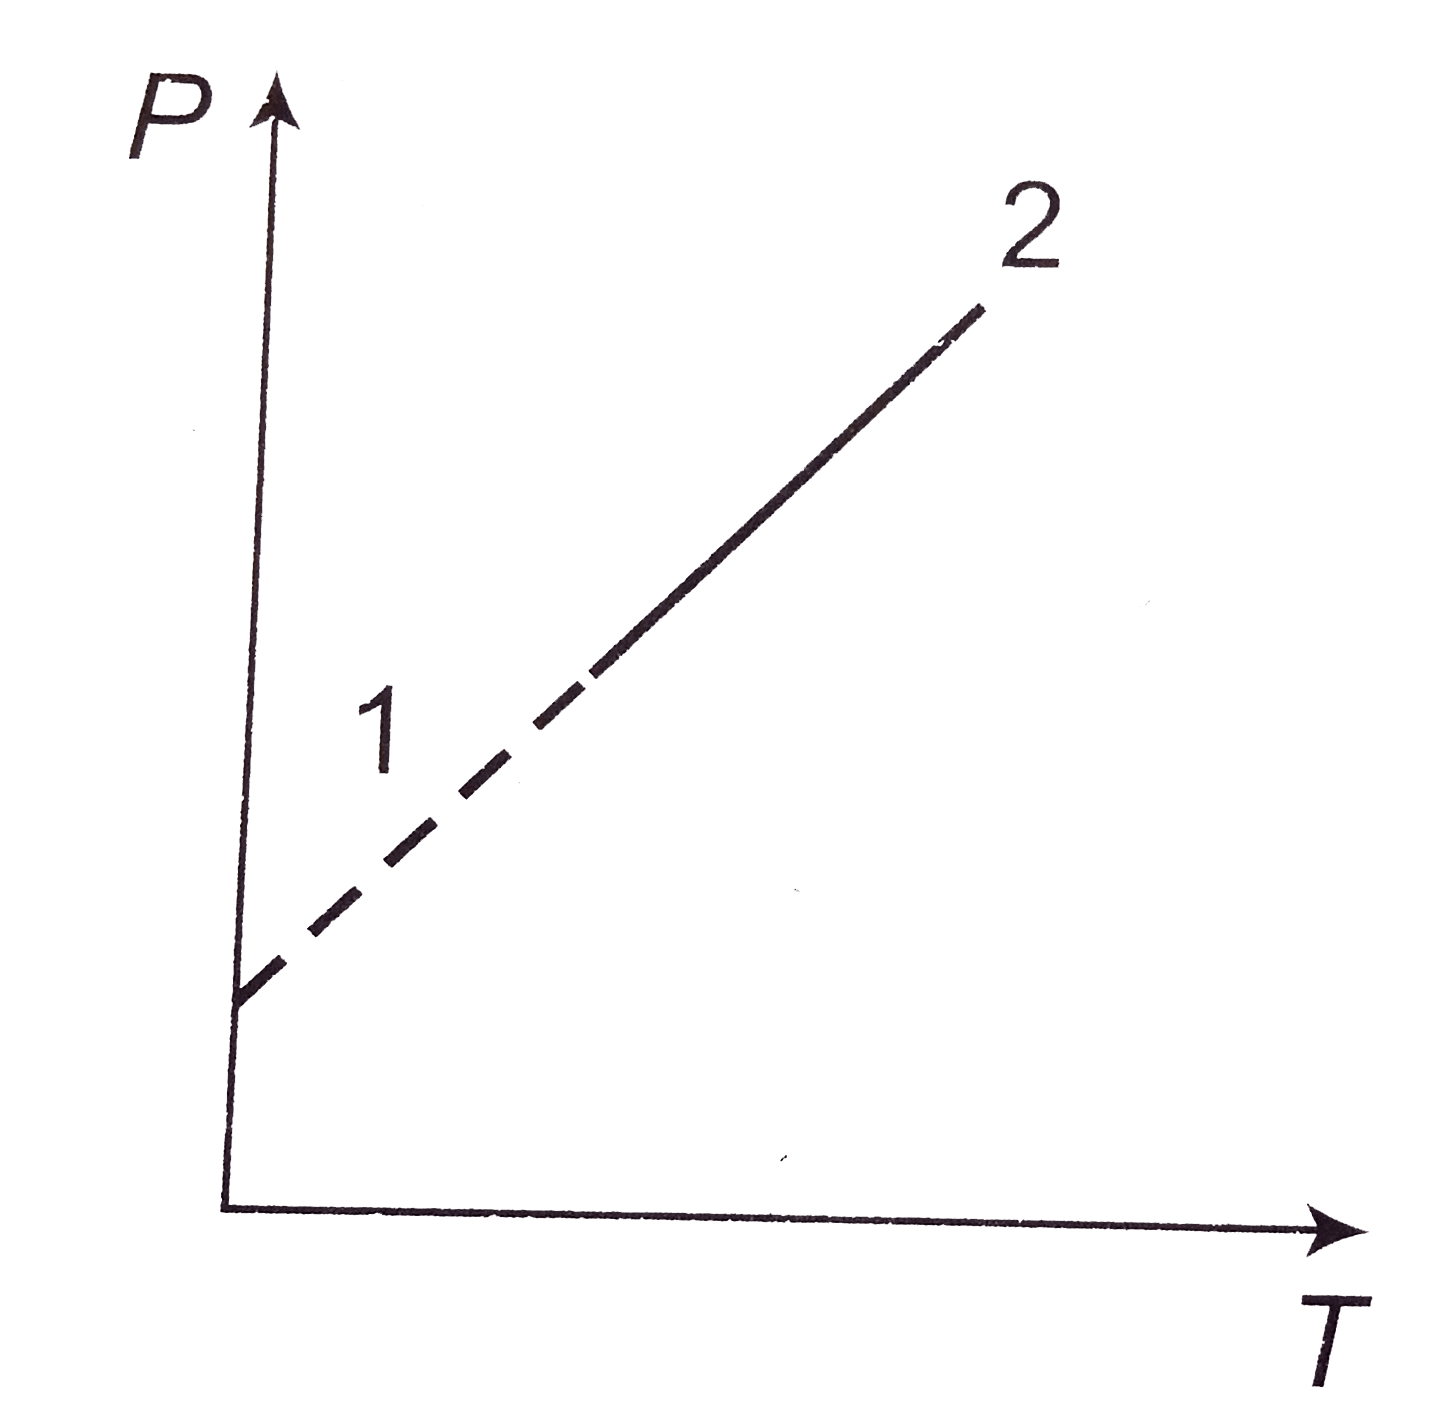 A pressure P, absolute temperature T, graph was obtained whe a given mass of a gas heated. During the heating process from the state 1 to the state 2, the volume